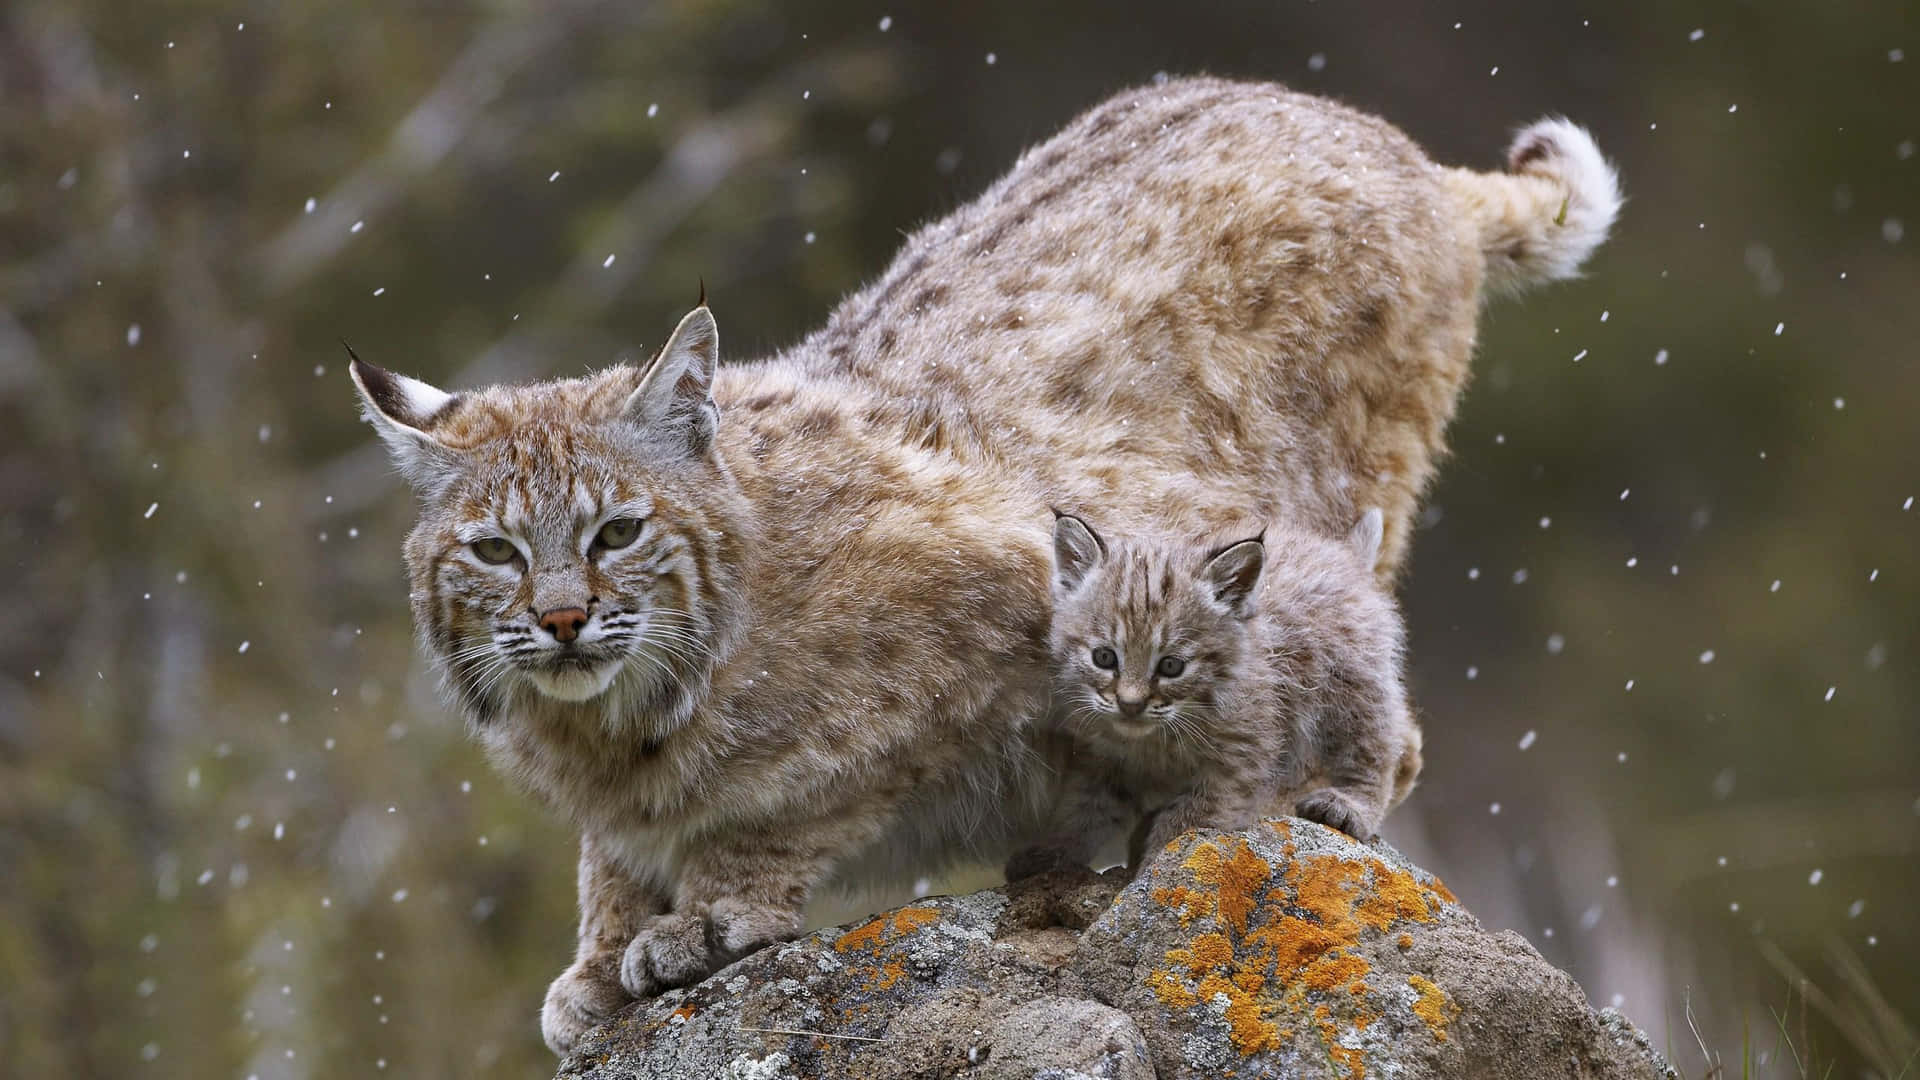 A Lynx And Her Kitten Standing On A Rock In The Rain